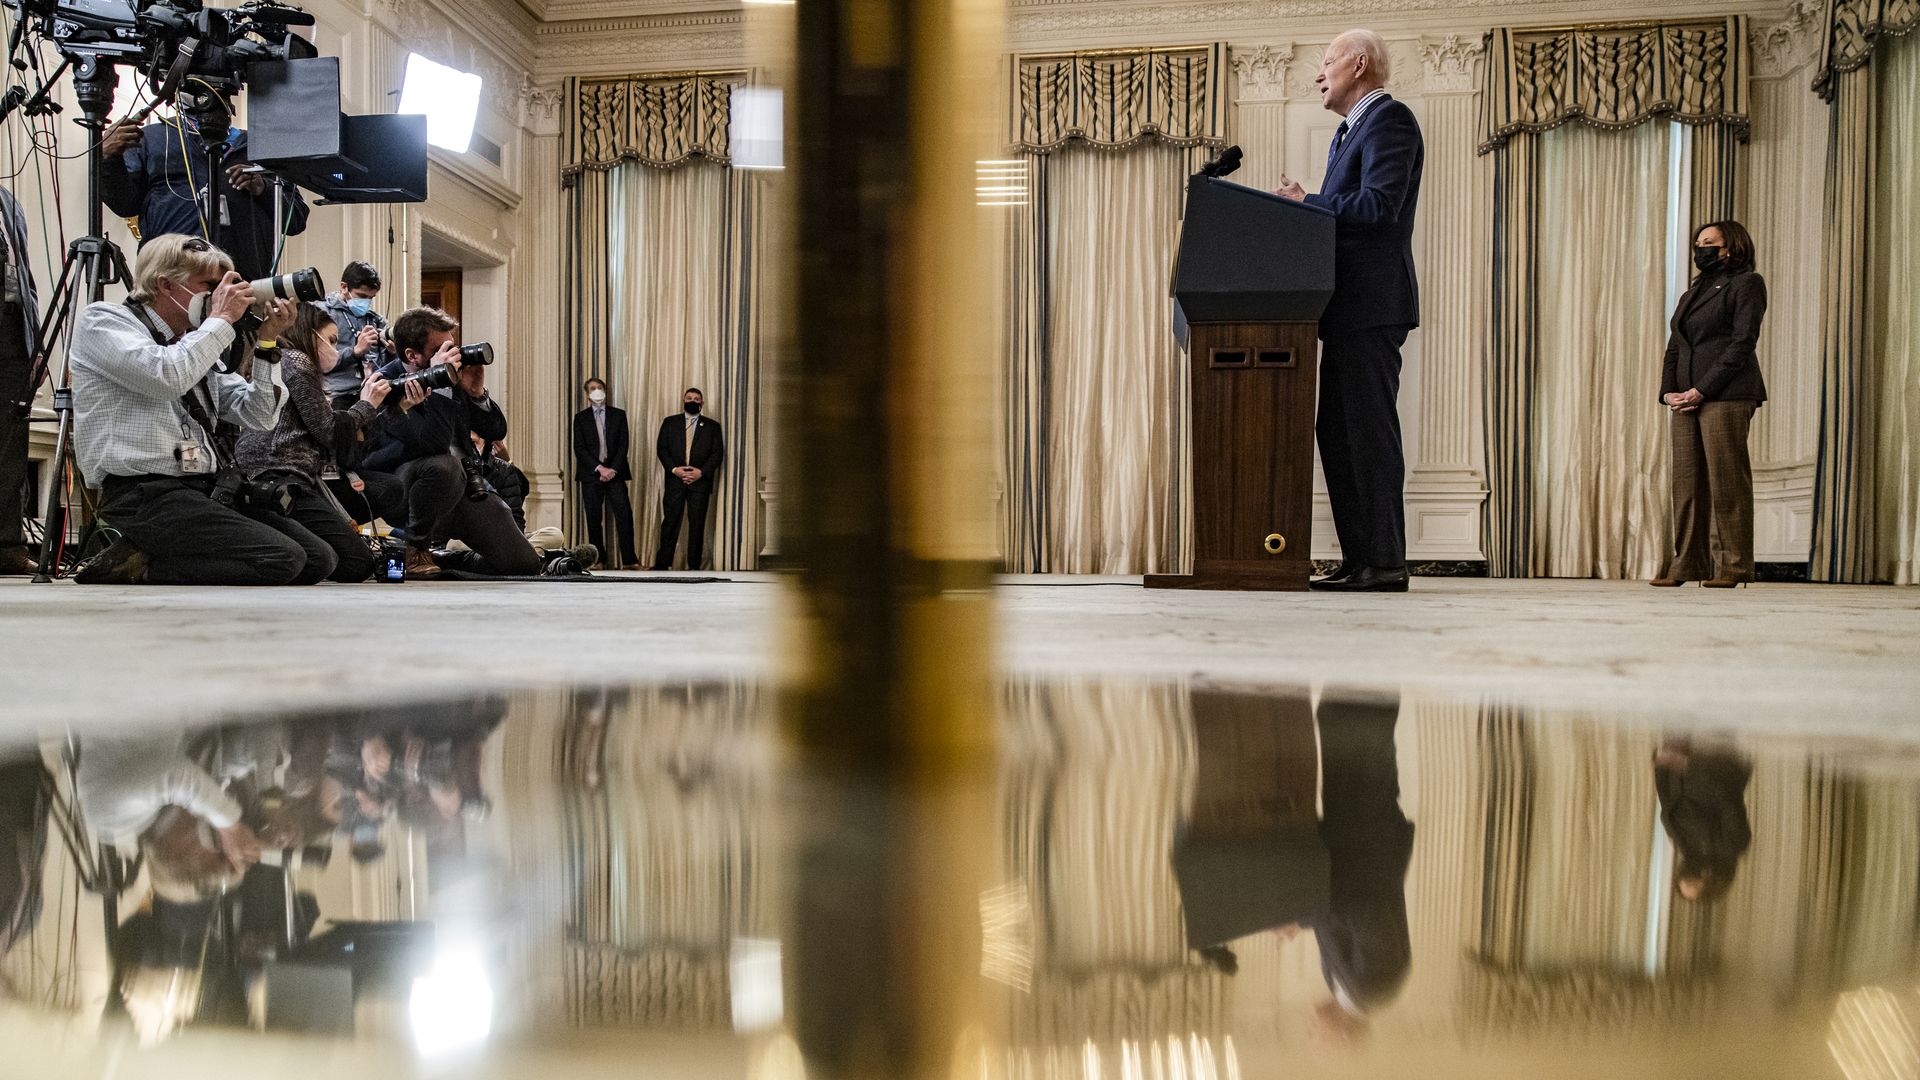 President Biden is seen reflected in a flag stand as he speaks about the Senate's passage of his COVID relief package.